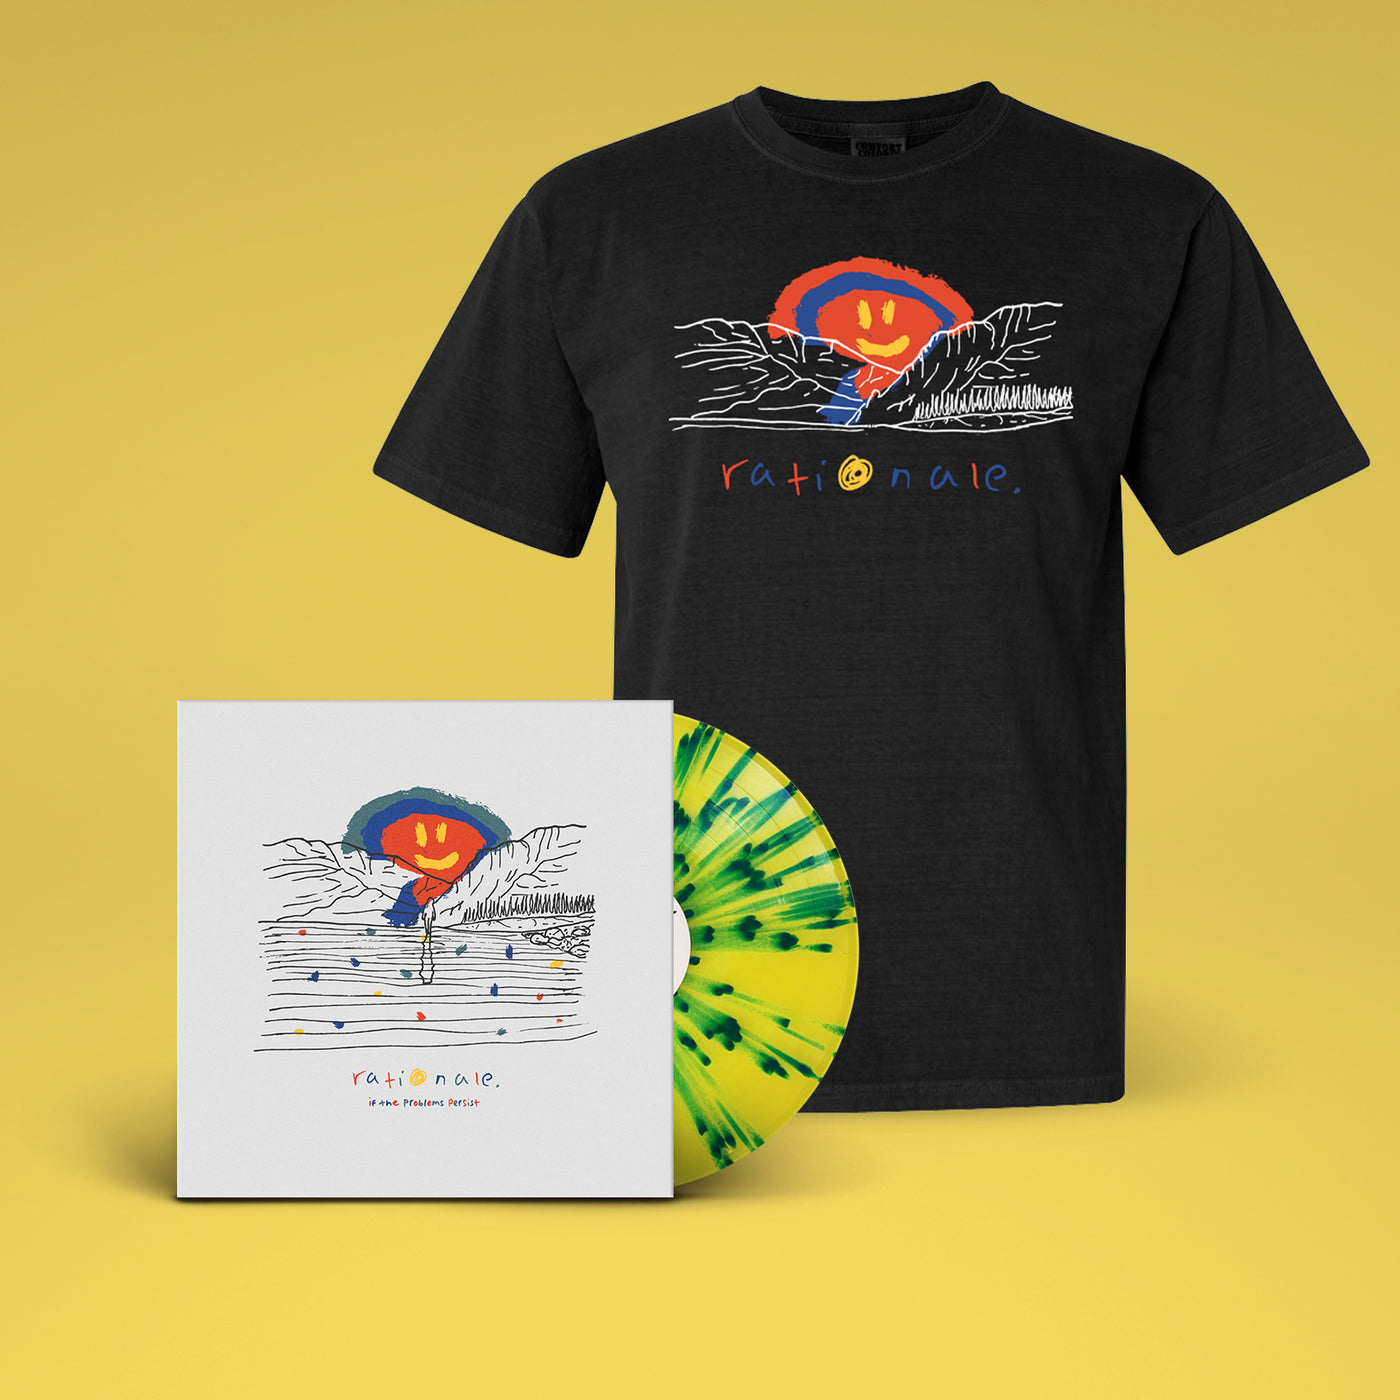 rationale. - If The Problems Persist LP + Album Cover Shirt